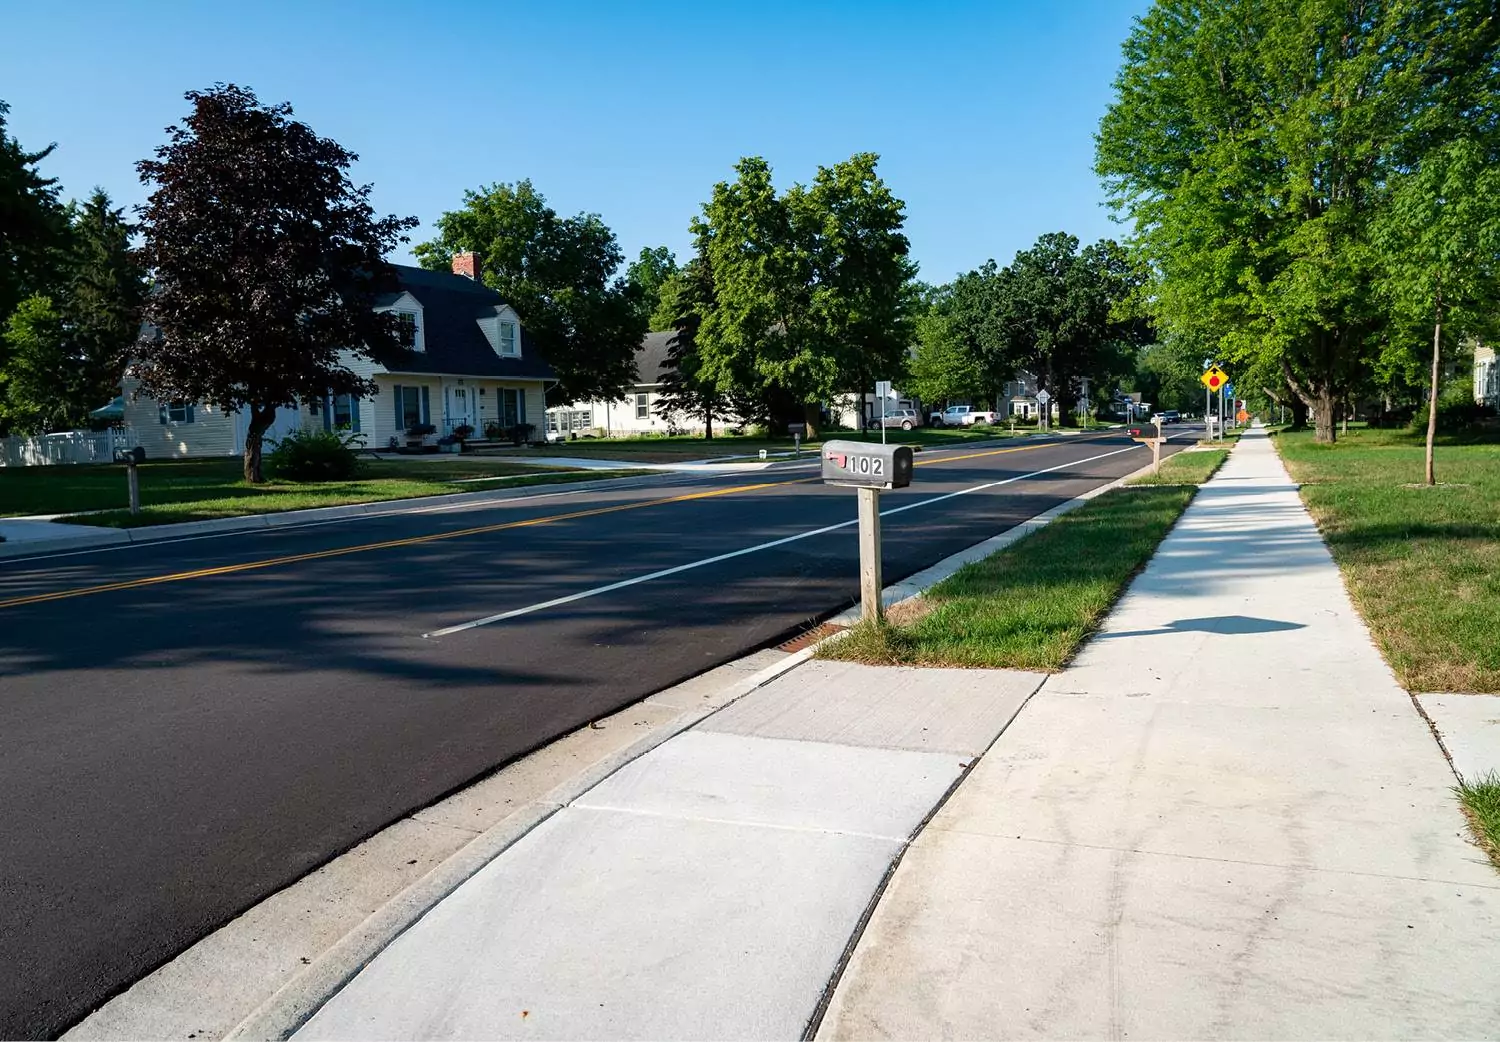 Rural Community Planning: Making Sure the Sidewalk Doesn’t End